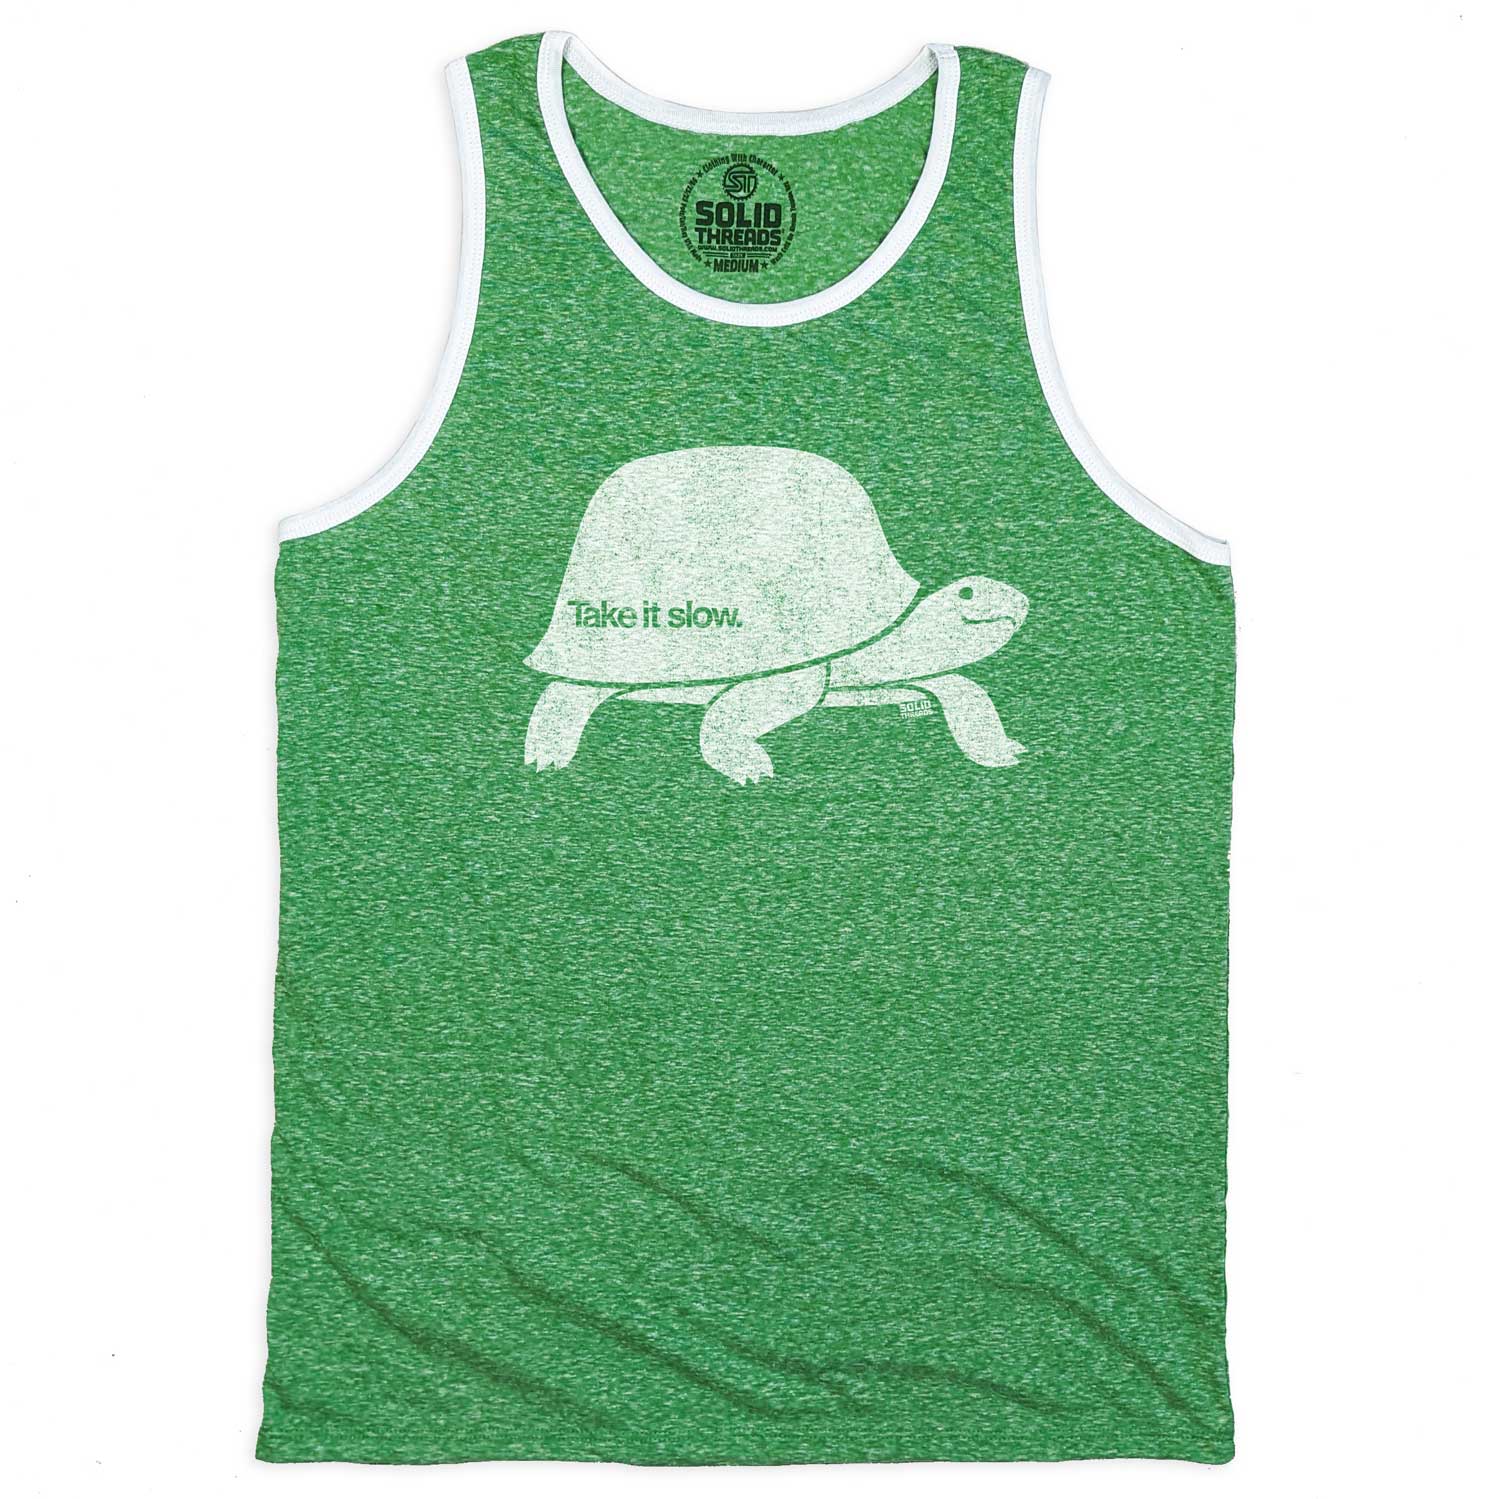 Men's Take it Slow Vintage Graphic Tank Top | Funny Turtle T-shirt | Solid Threads